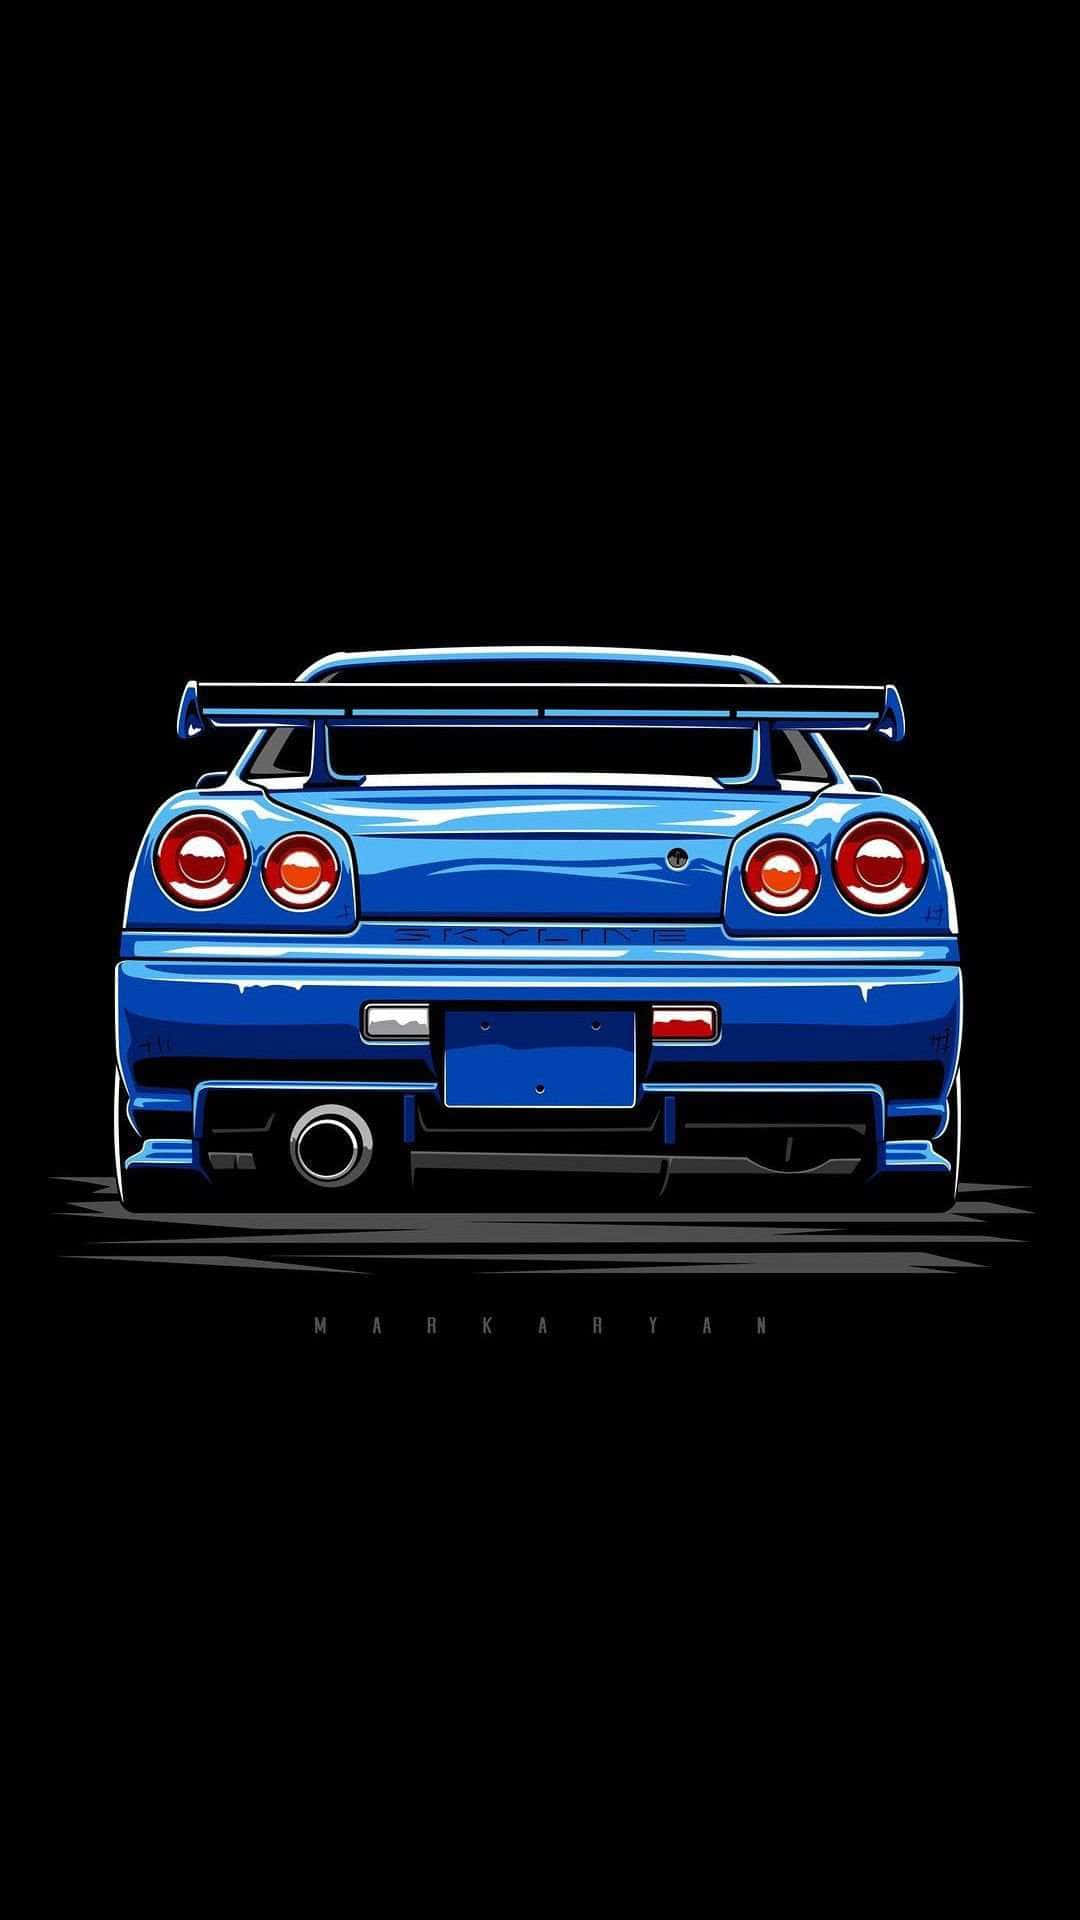 Look cool in the driver's seat of an iconic Nissan Skyline Wallpaper